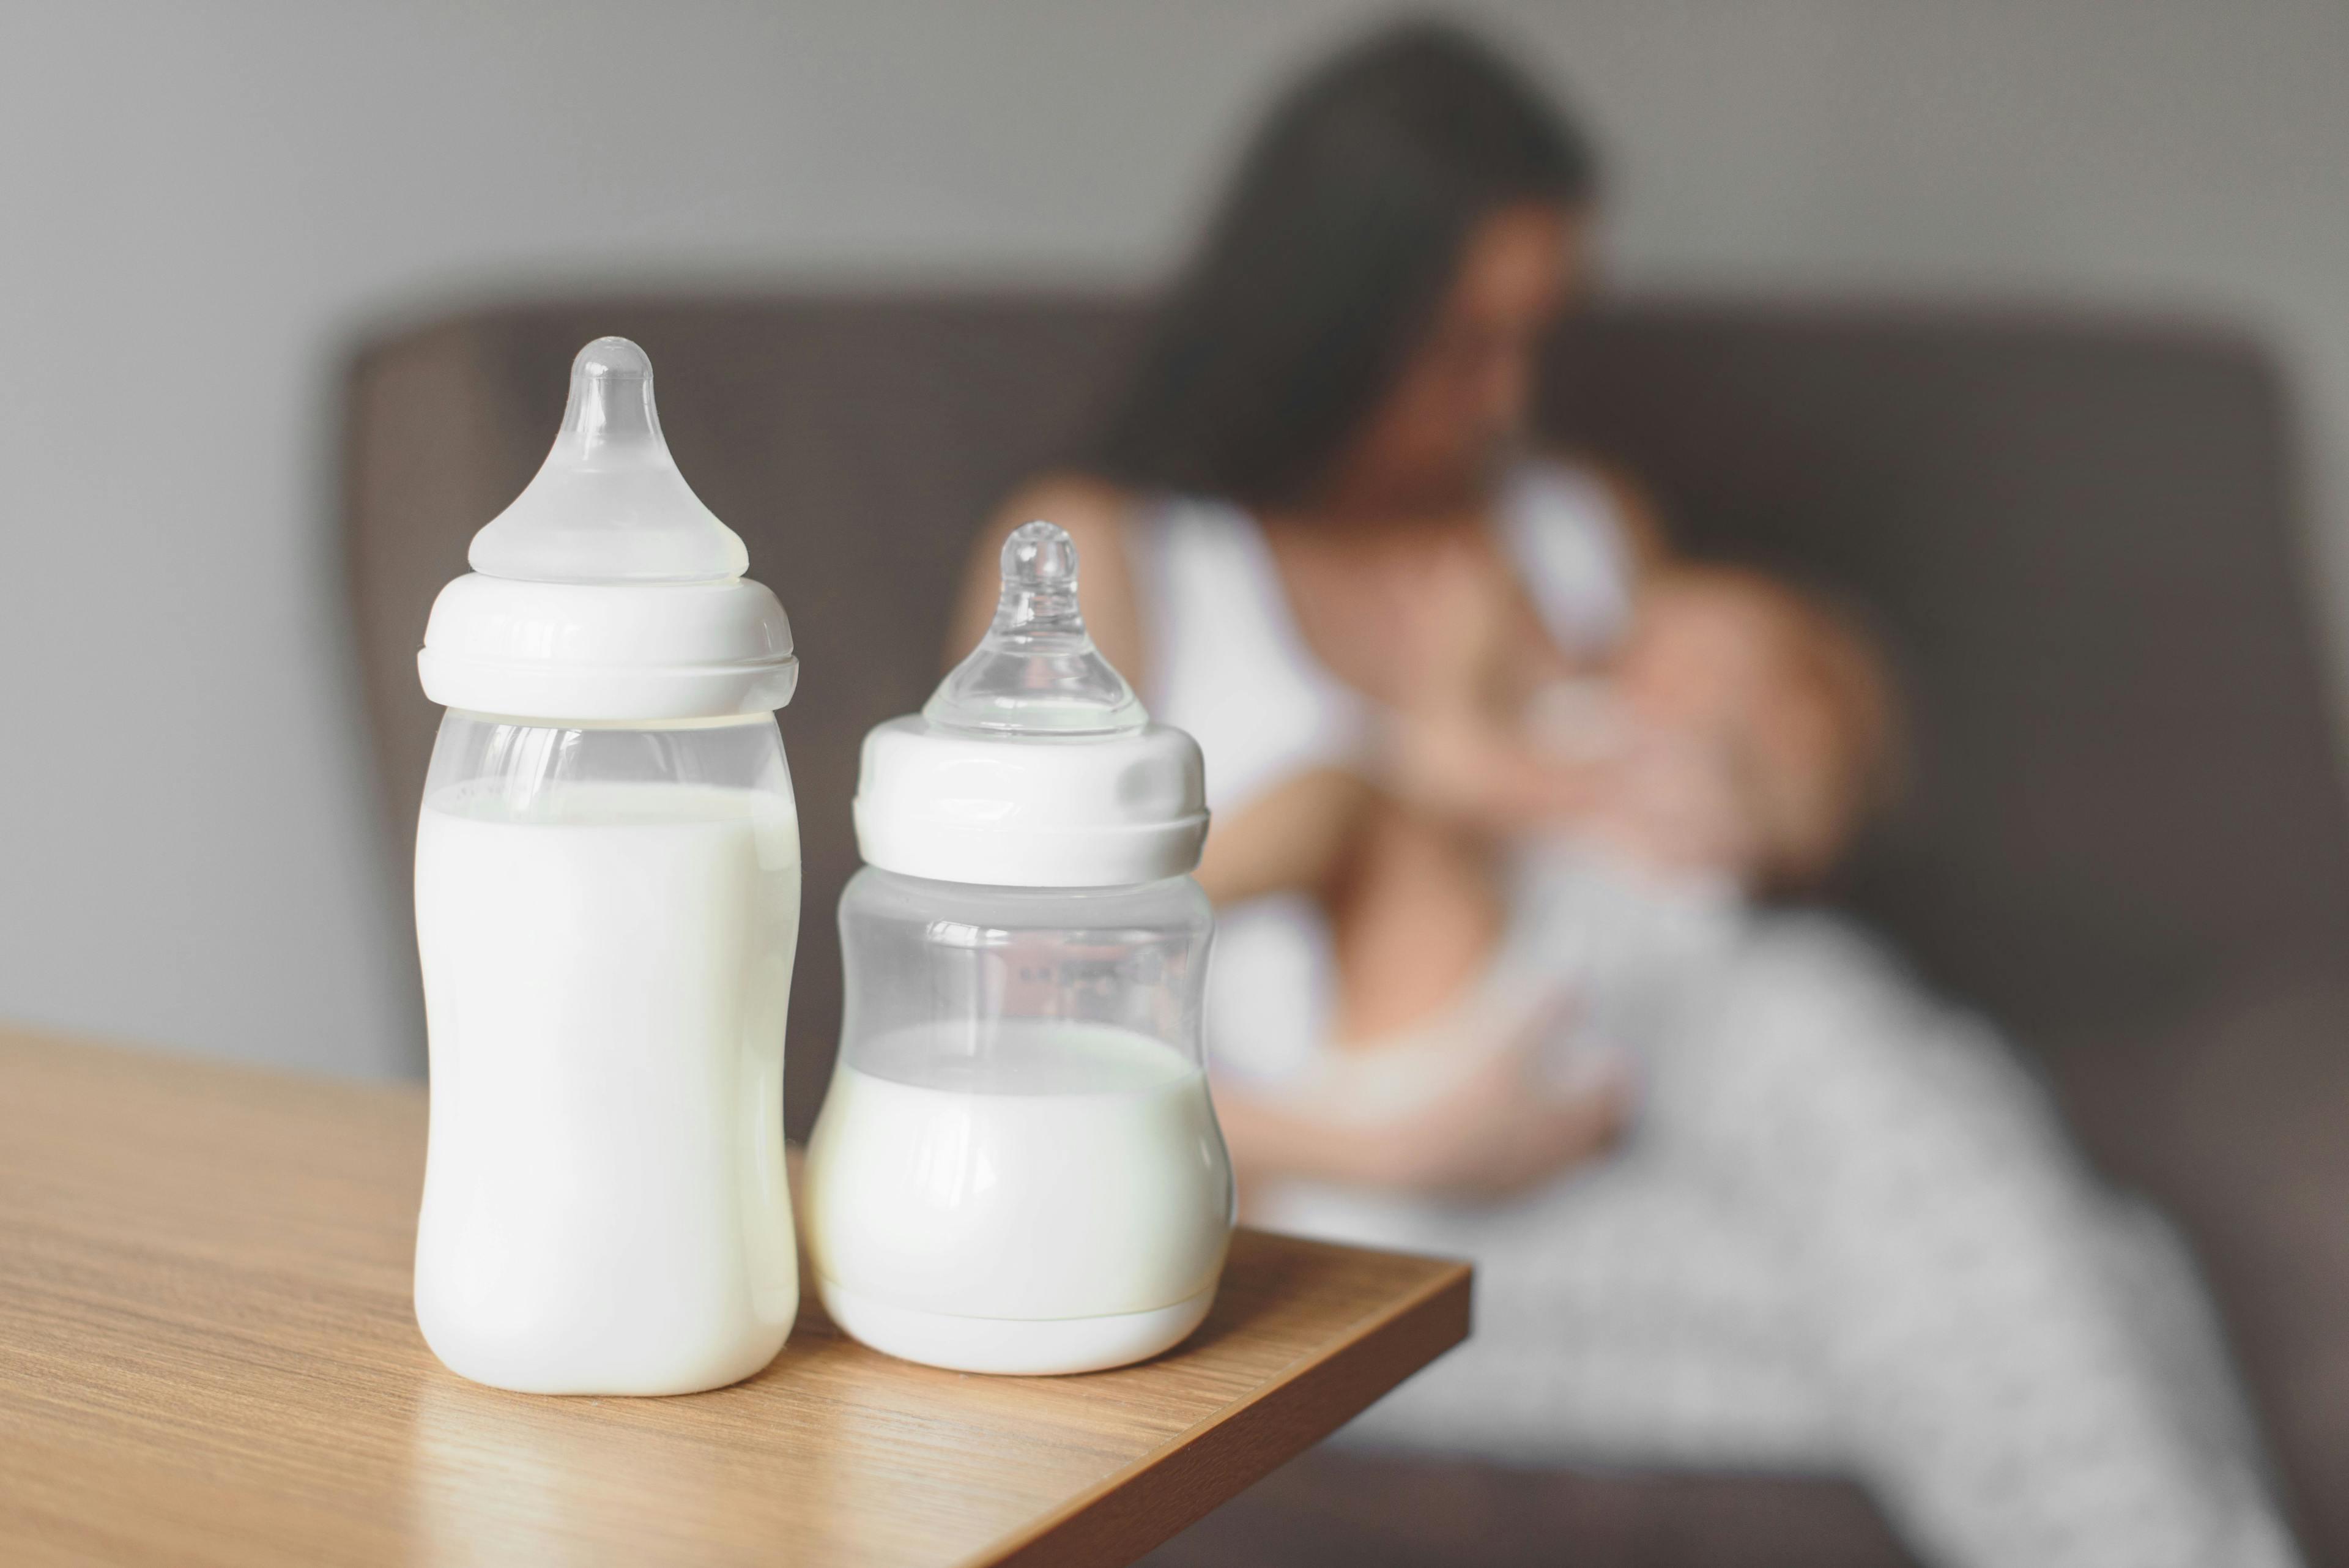 Assessing knowledge of breastfeeding benefits among ethnic minority groups |  Image Credit: © evso - © evso - stock.adobe.com.